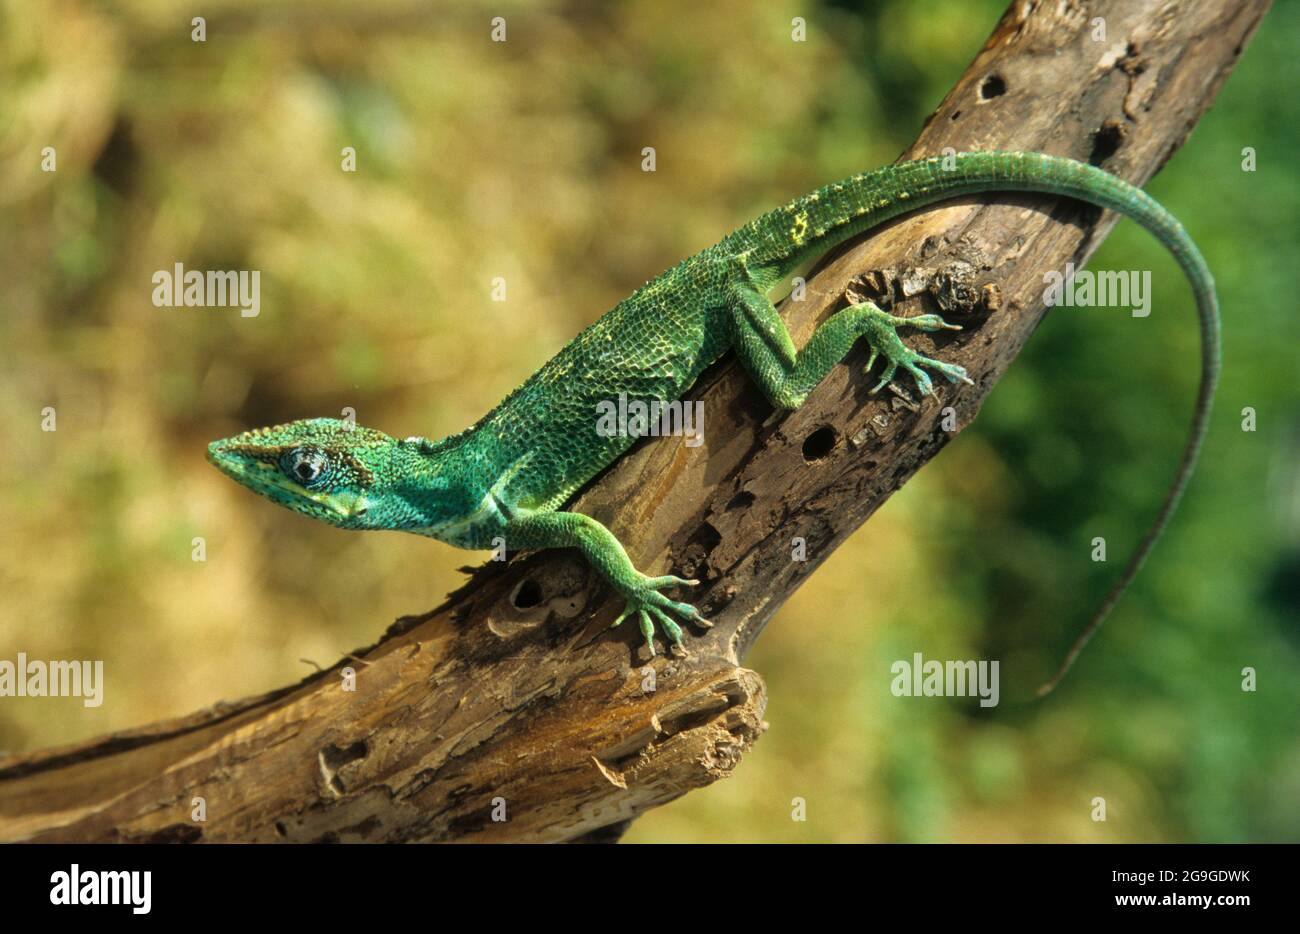 Anolis carolinensis or green anole is a tree-dwelling species of anole lizard native to the southeastern United States and introduced to islands in th Stock Photo